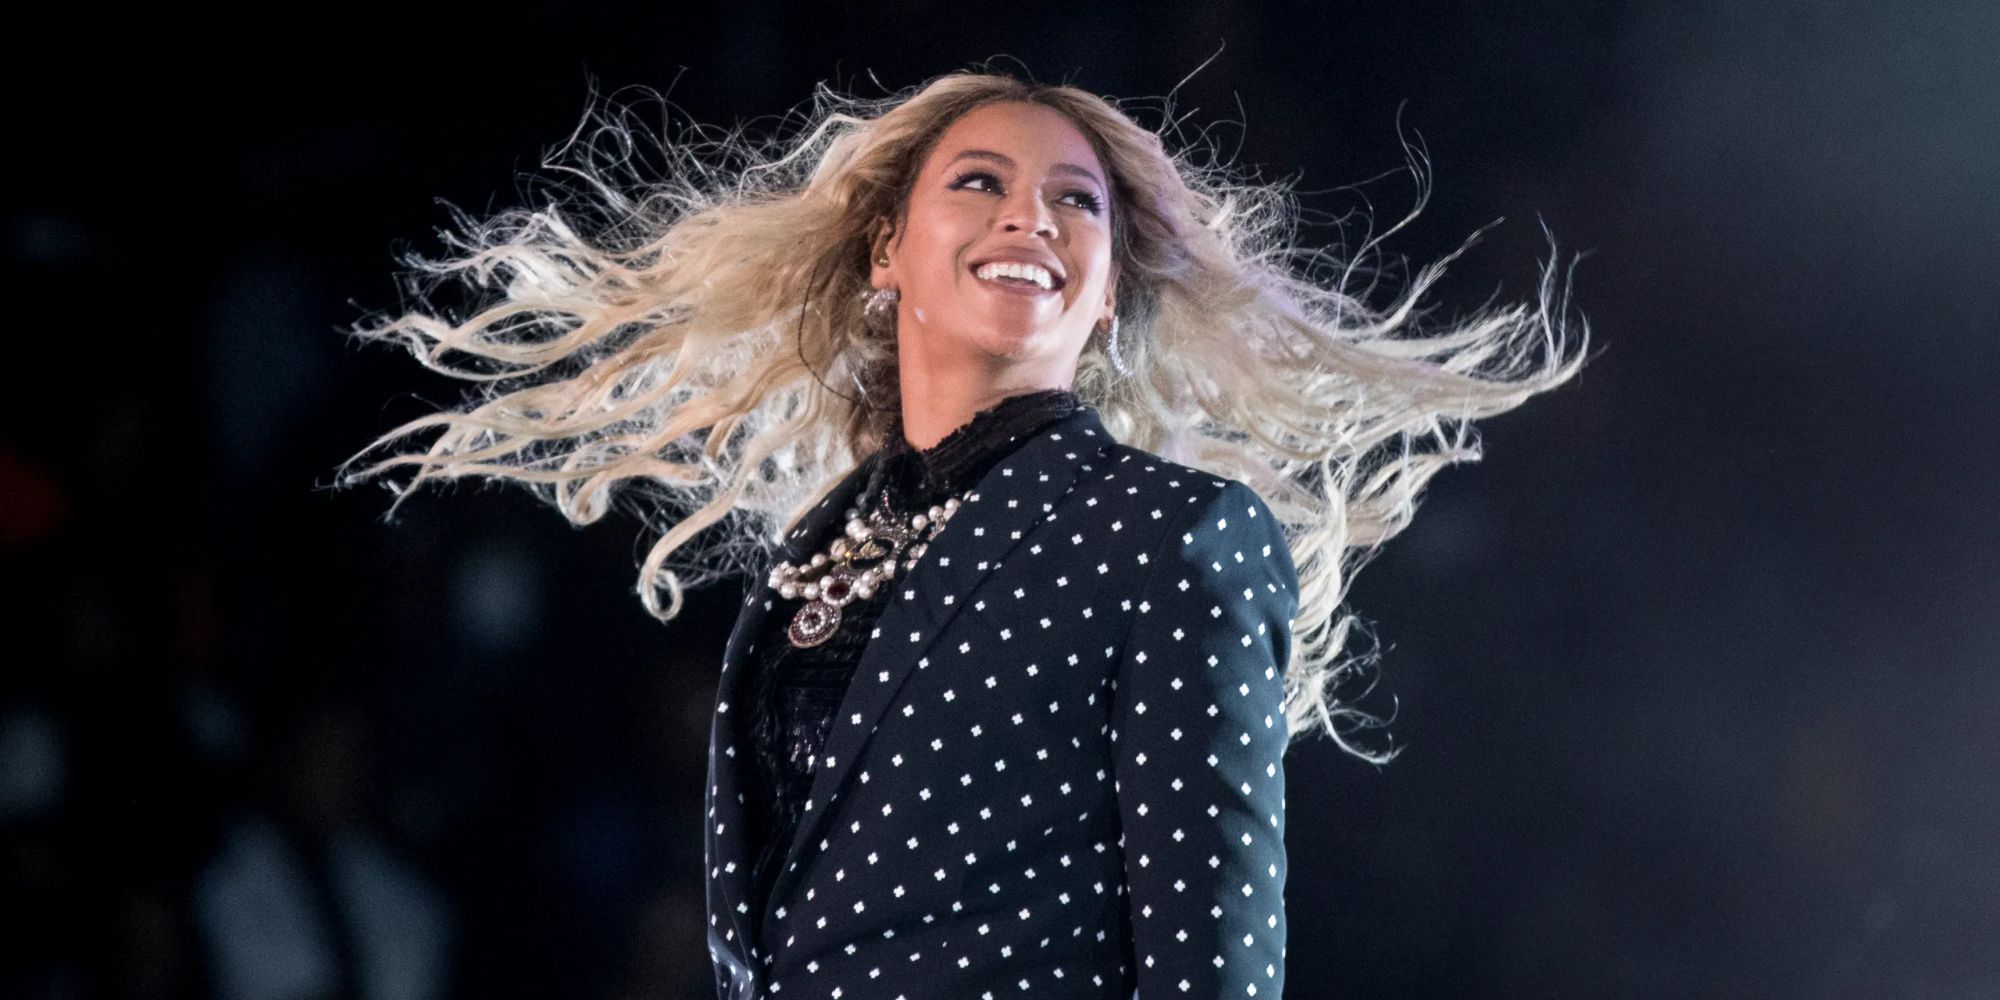 Beyonce is smiling on stage during a concert